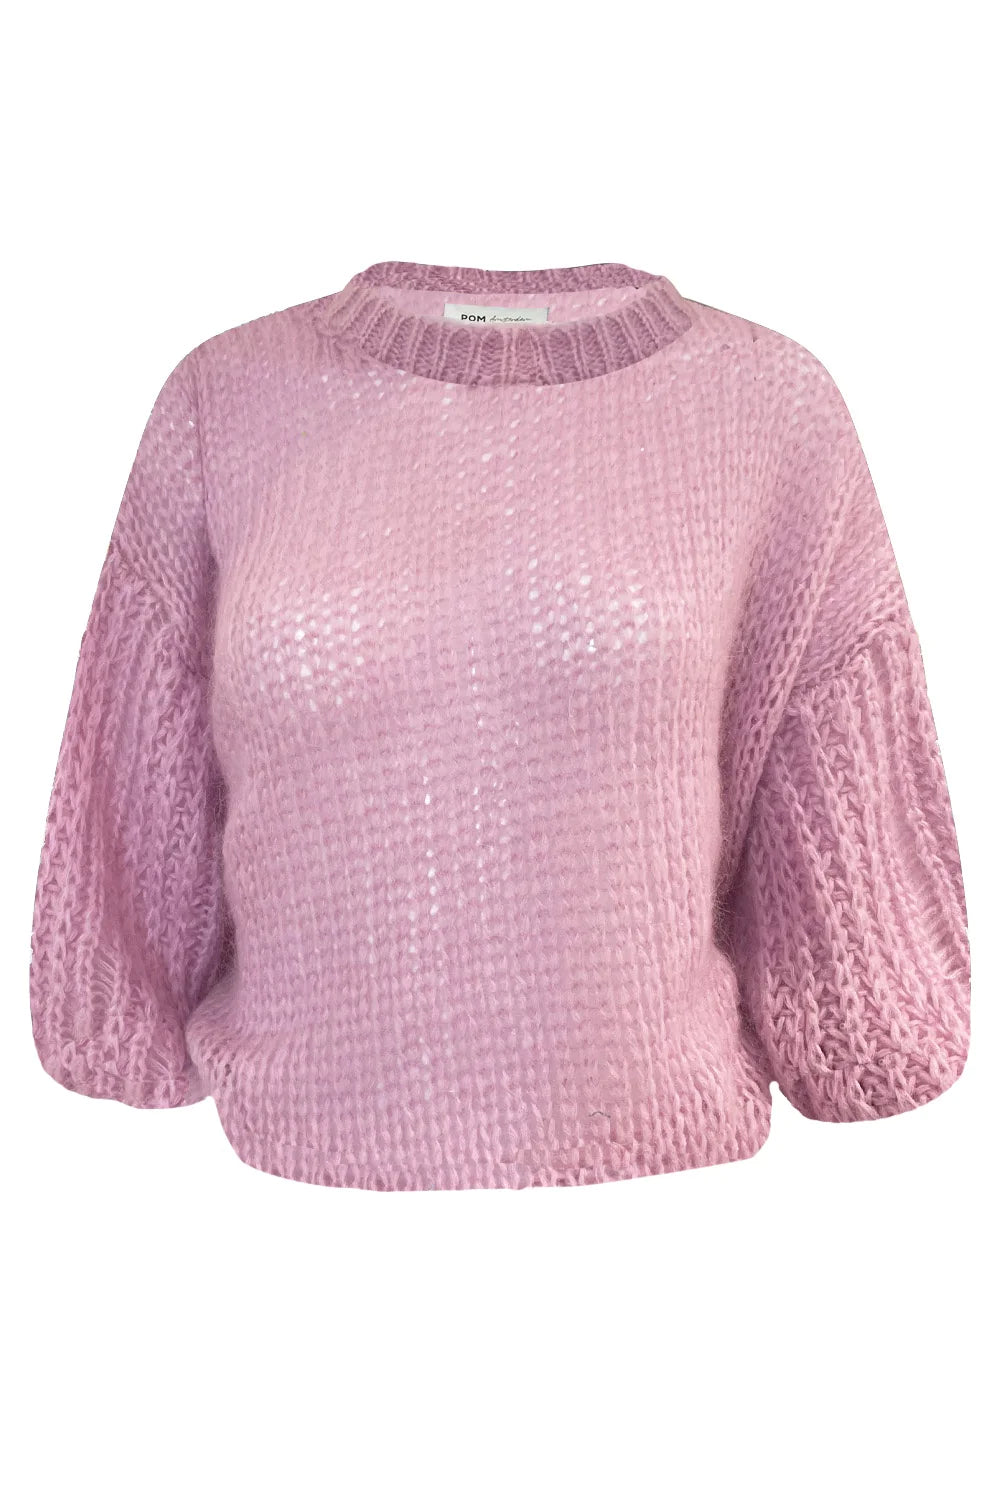 POM Amsterdam - Lilac Pink Pullover Knit